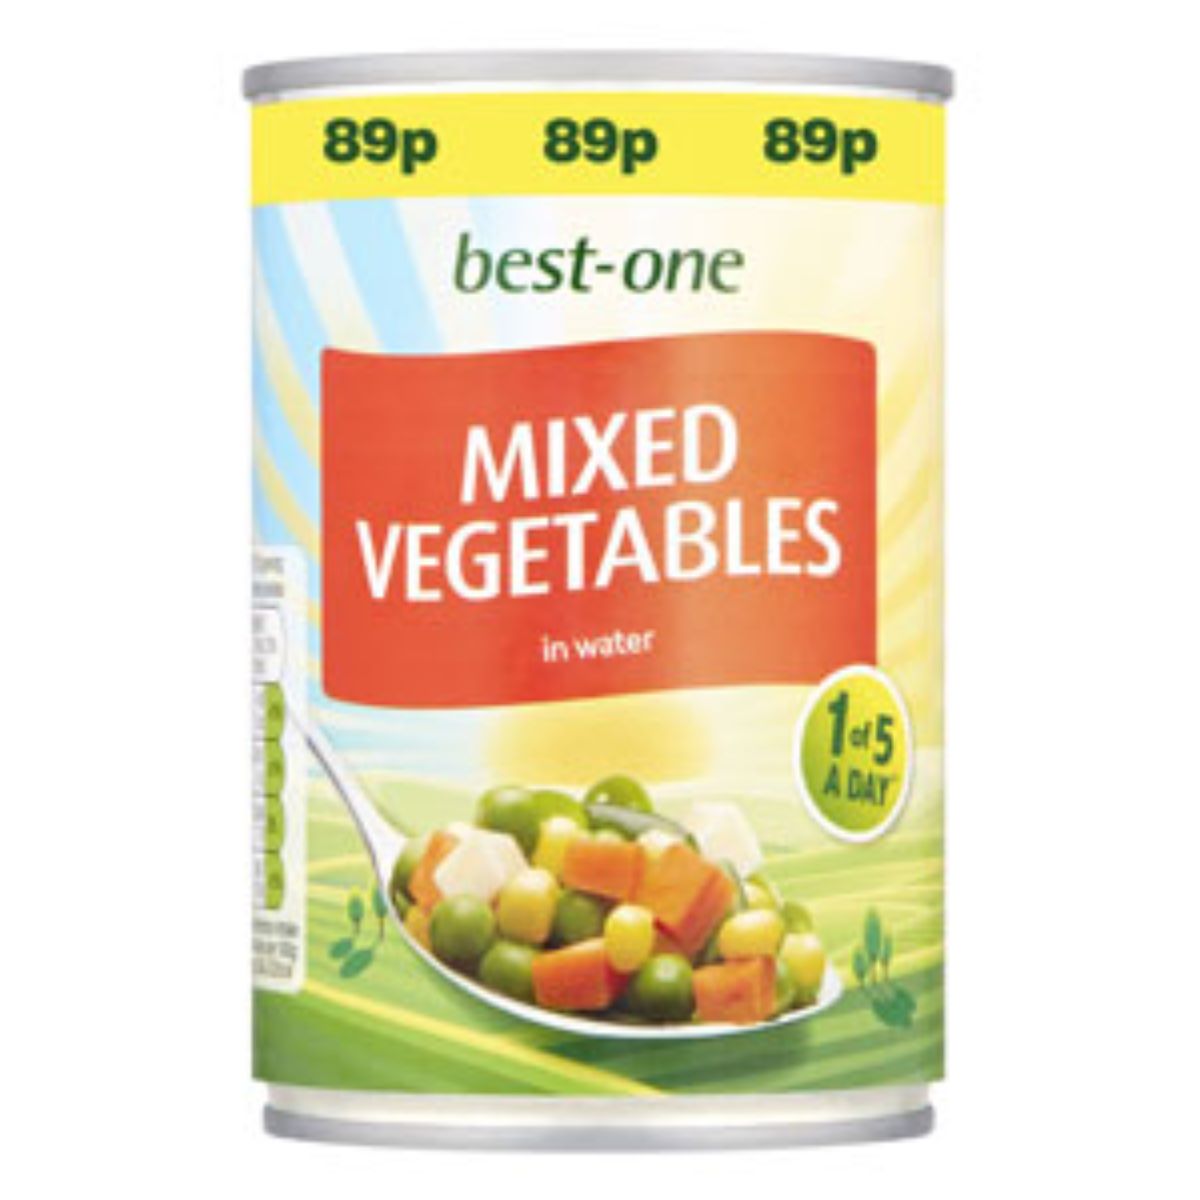 Best One - Mixed Vegetables - 300g in water.